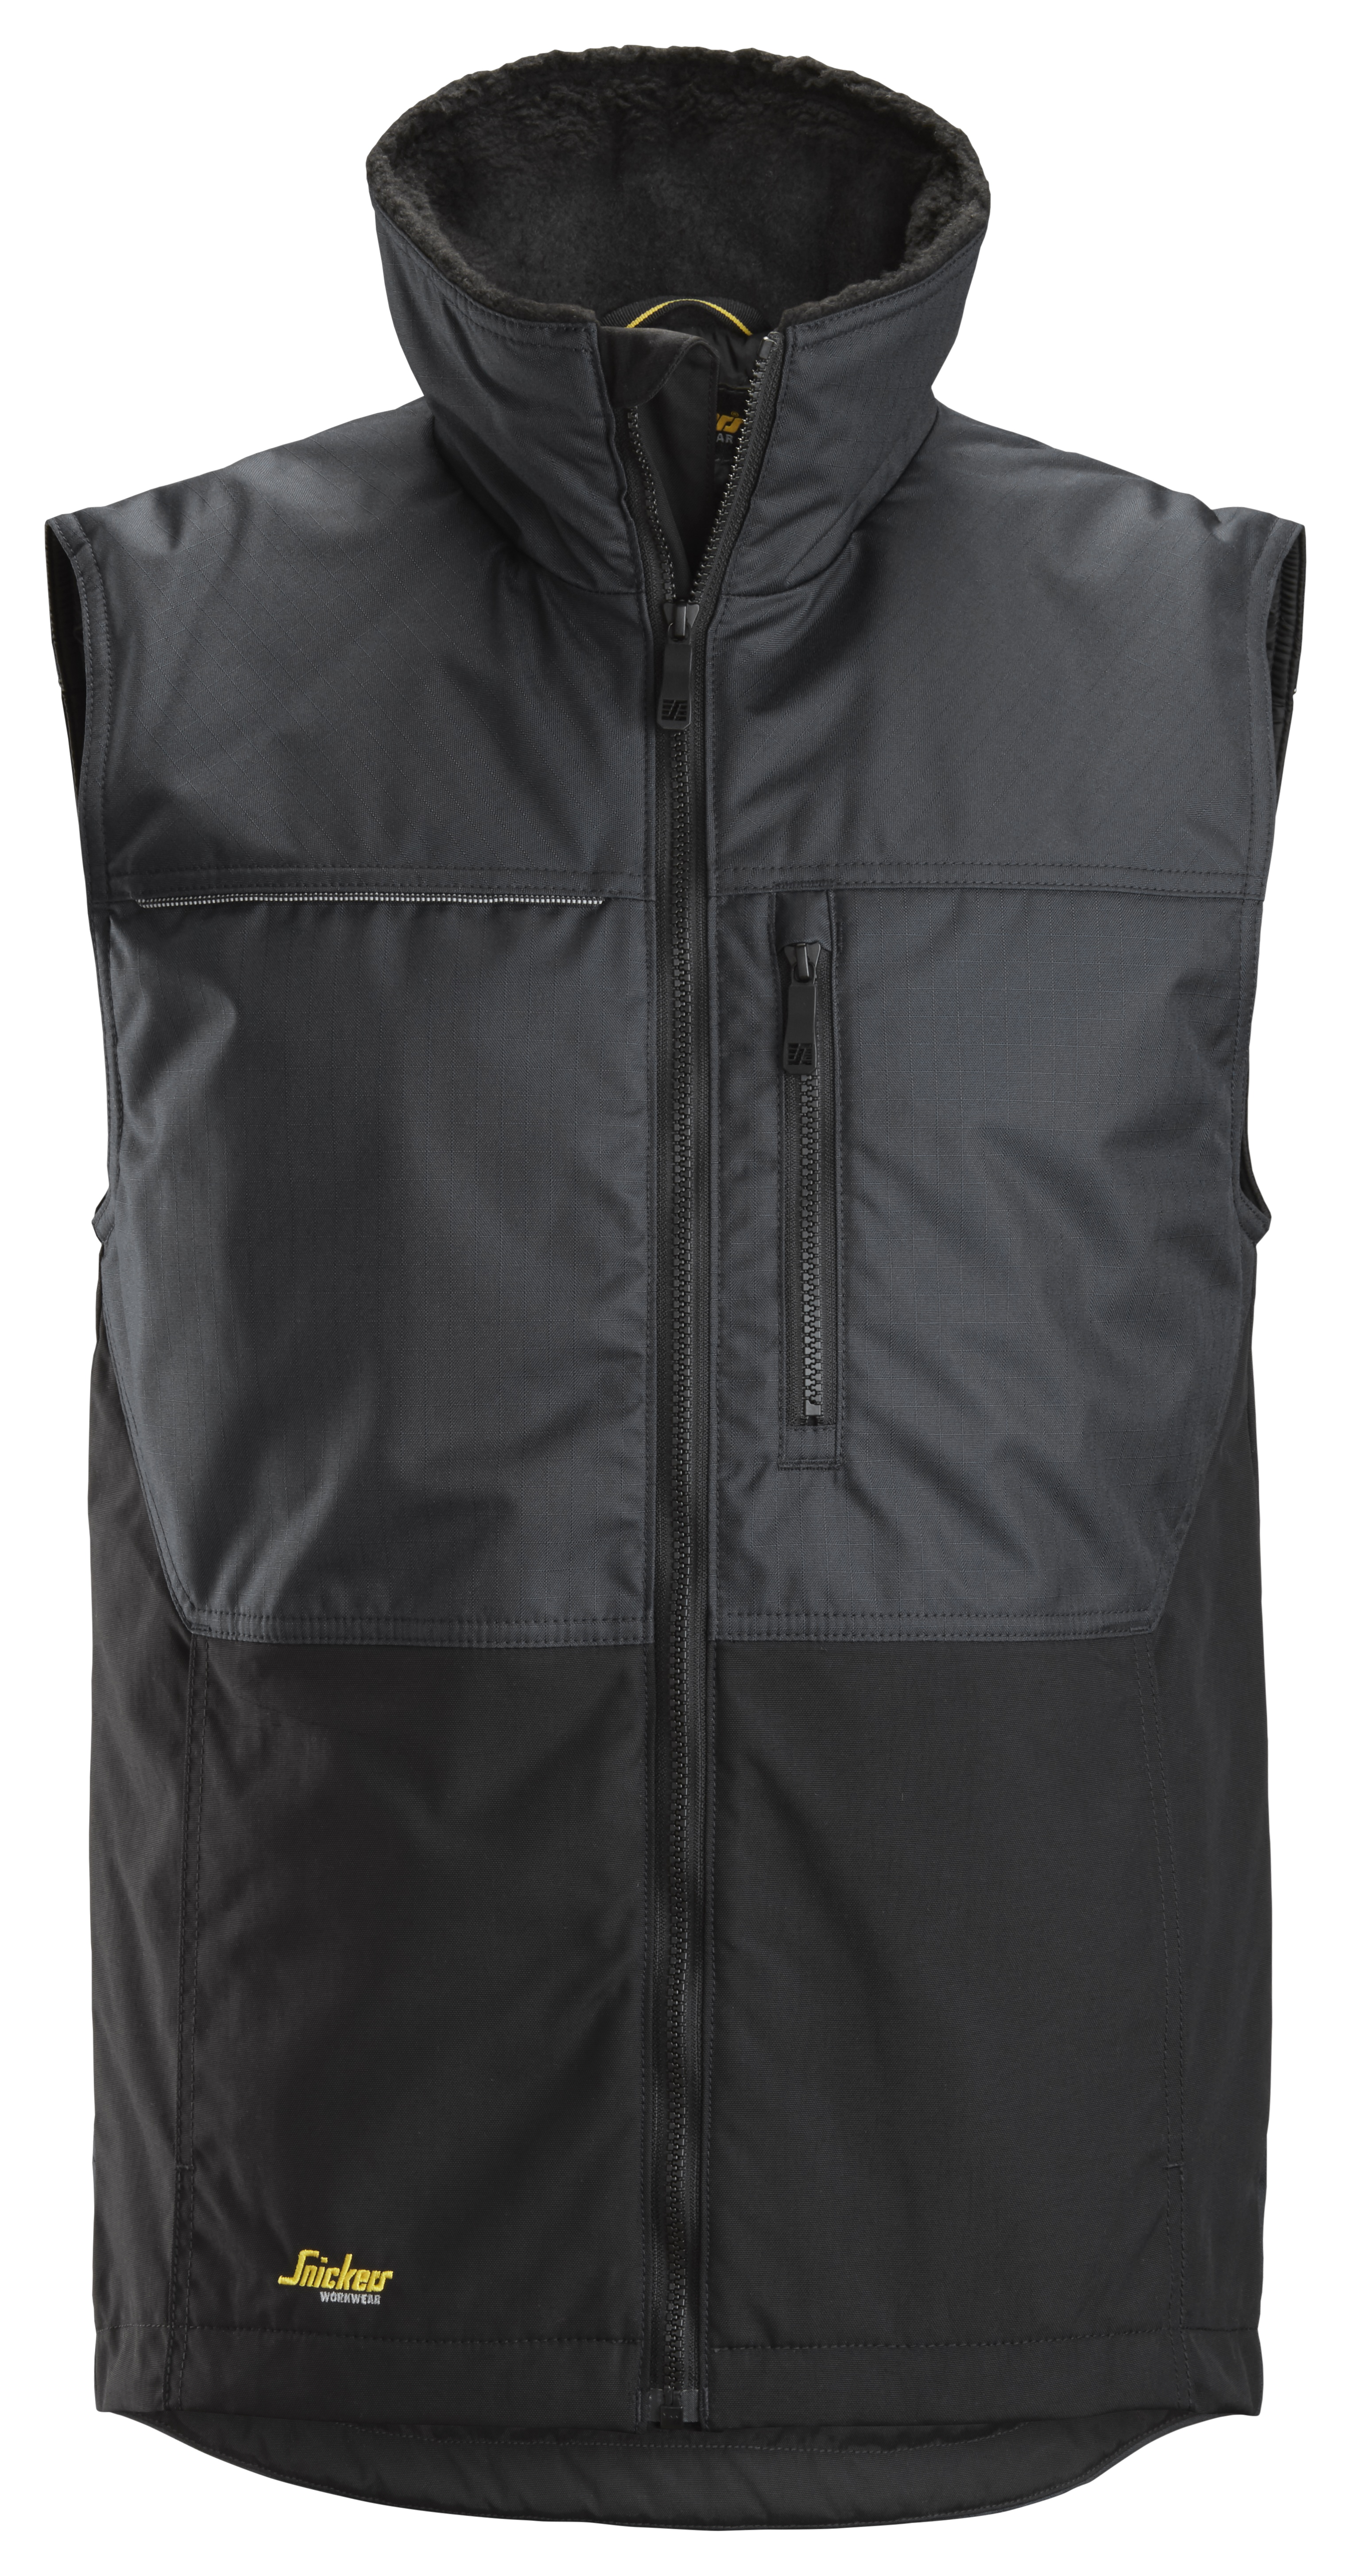 Snickers 4548 - AllroundWork, Gilet d’hiver